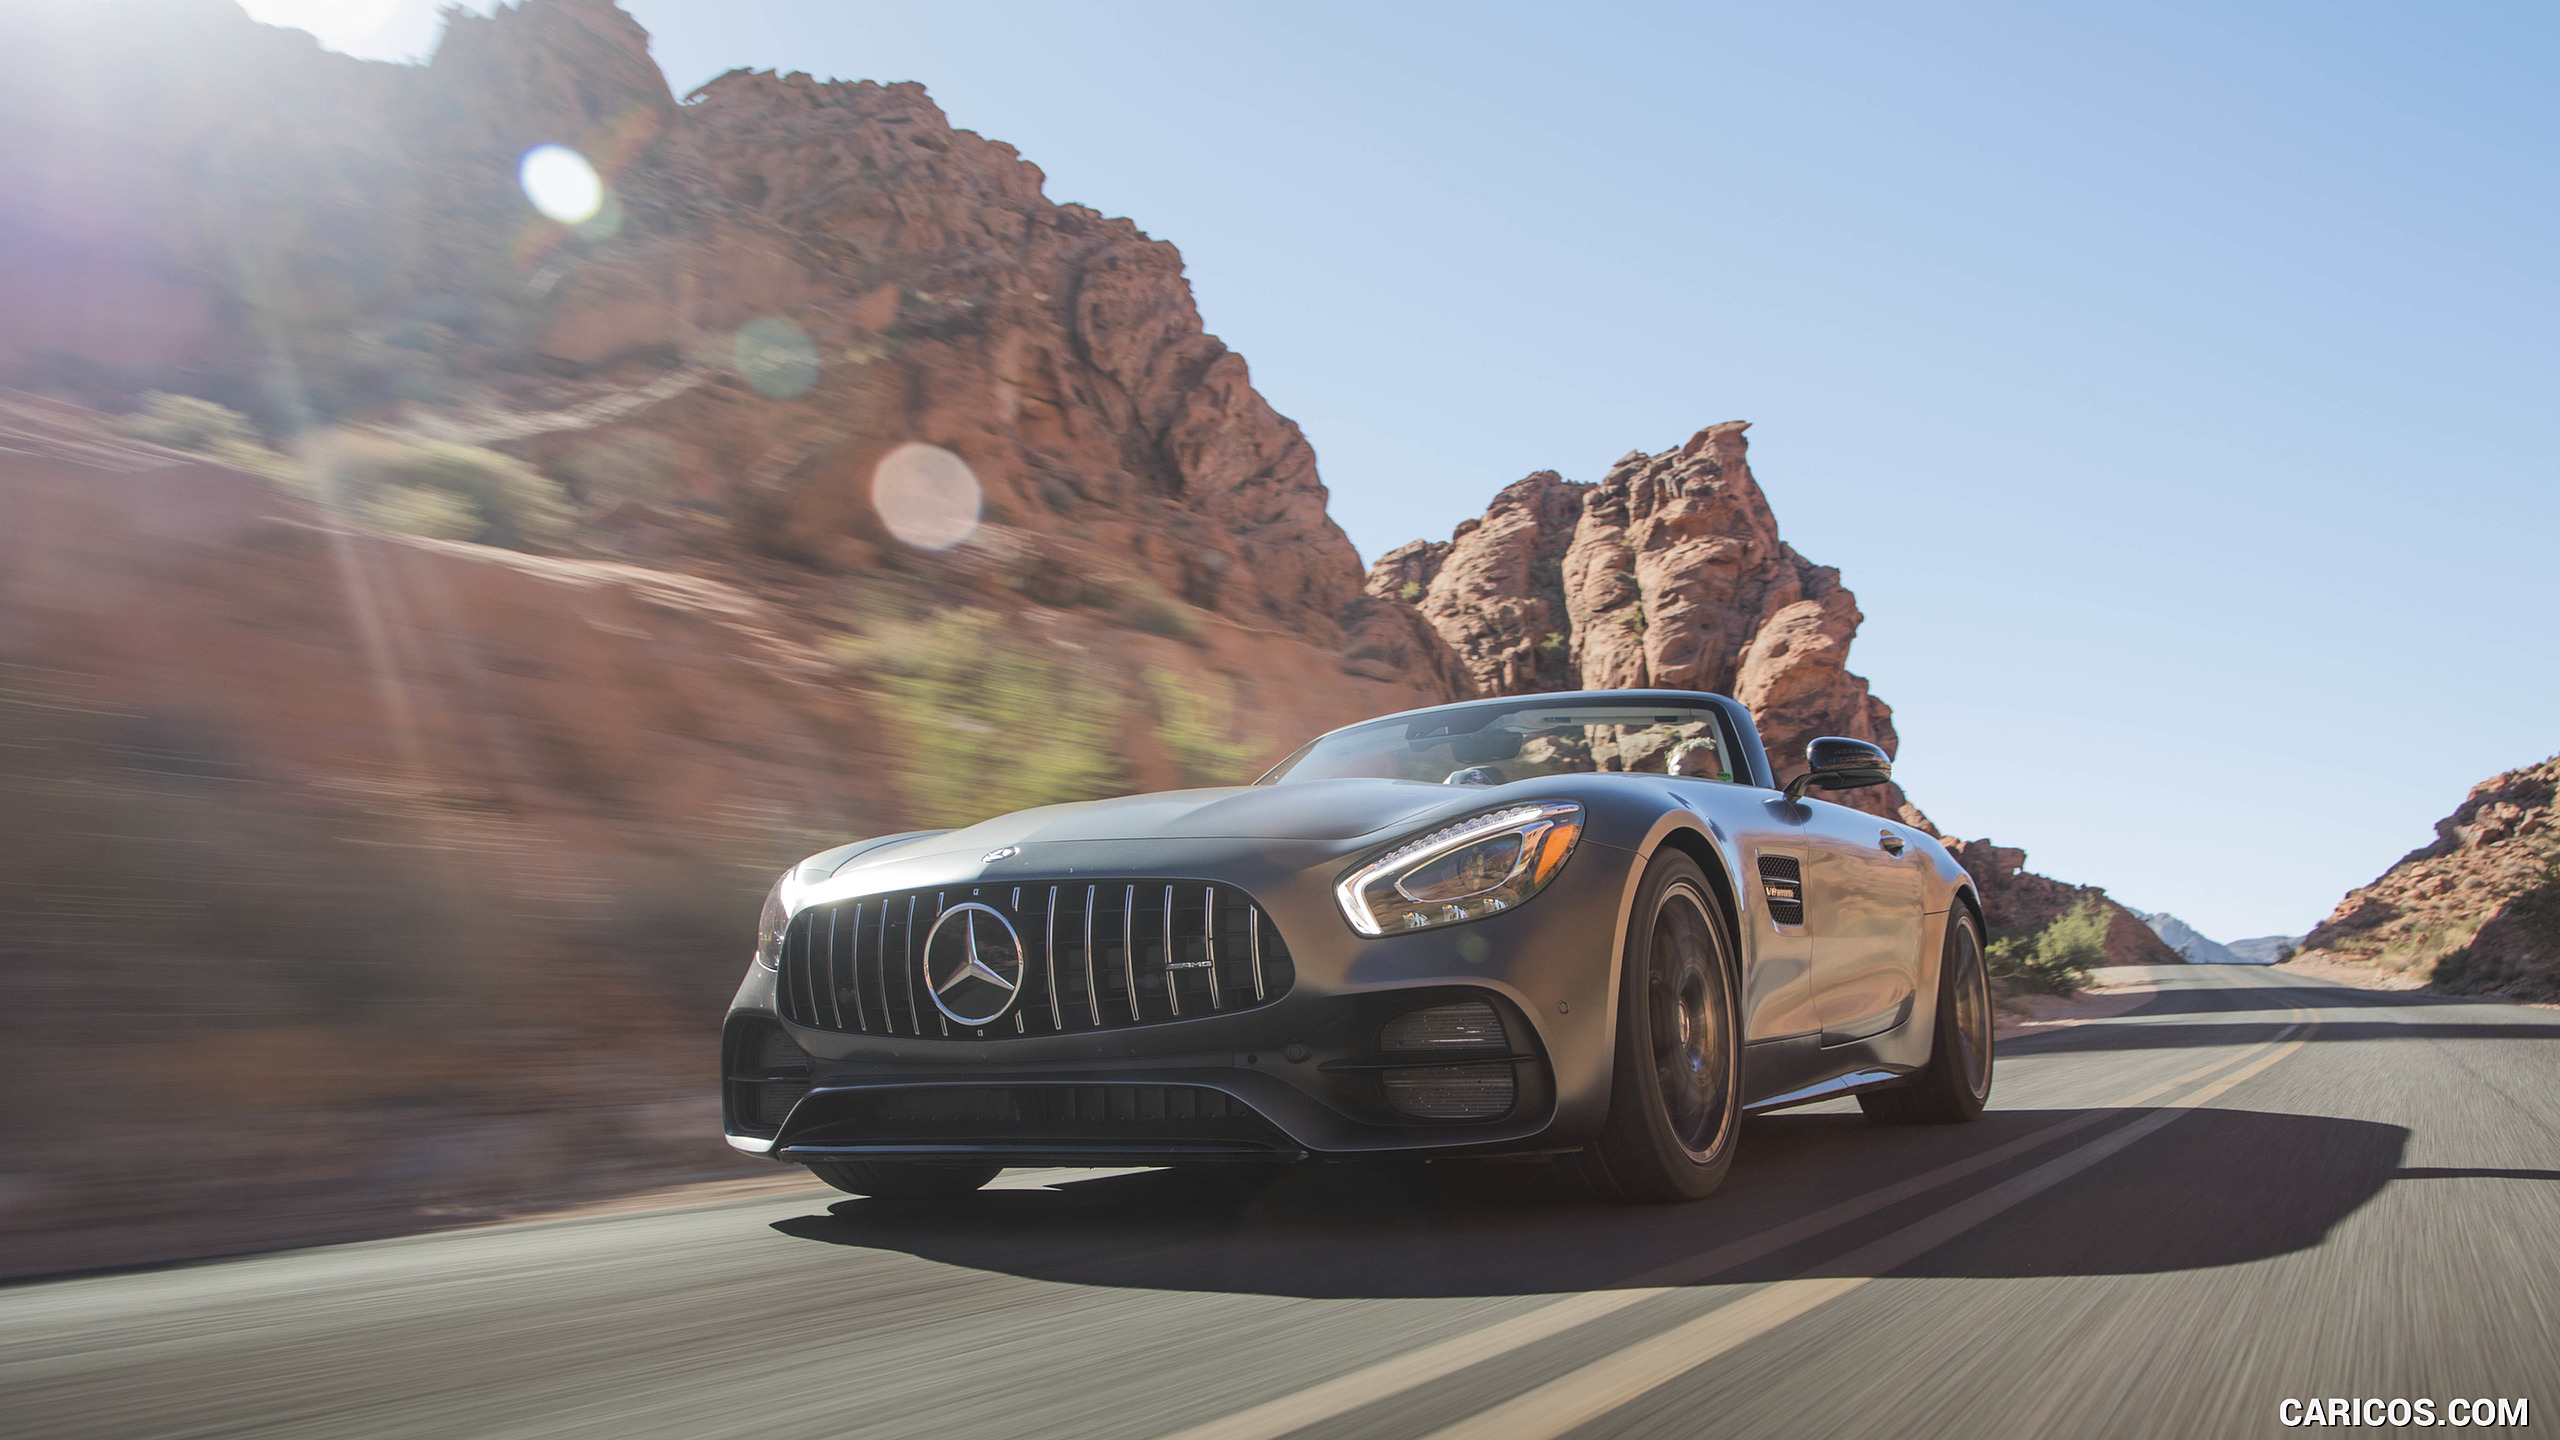 2018 Mercedes-AMG GT C Roadster - Front Three-Quarter, #49 of 350